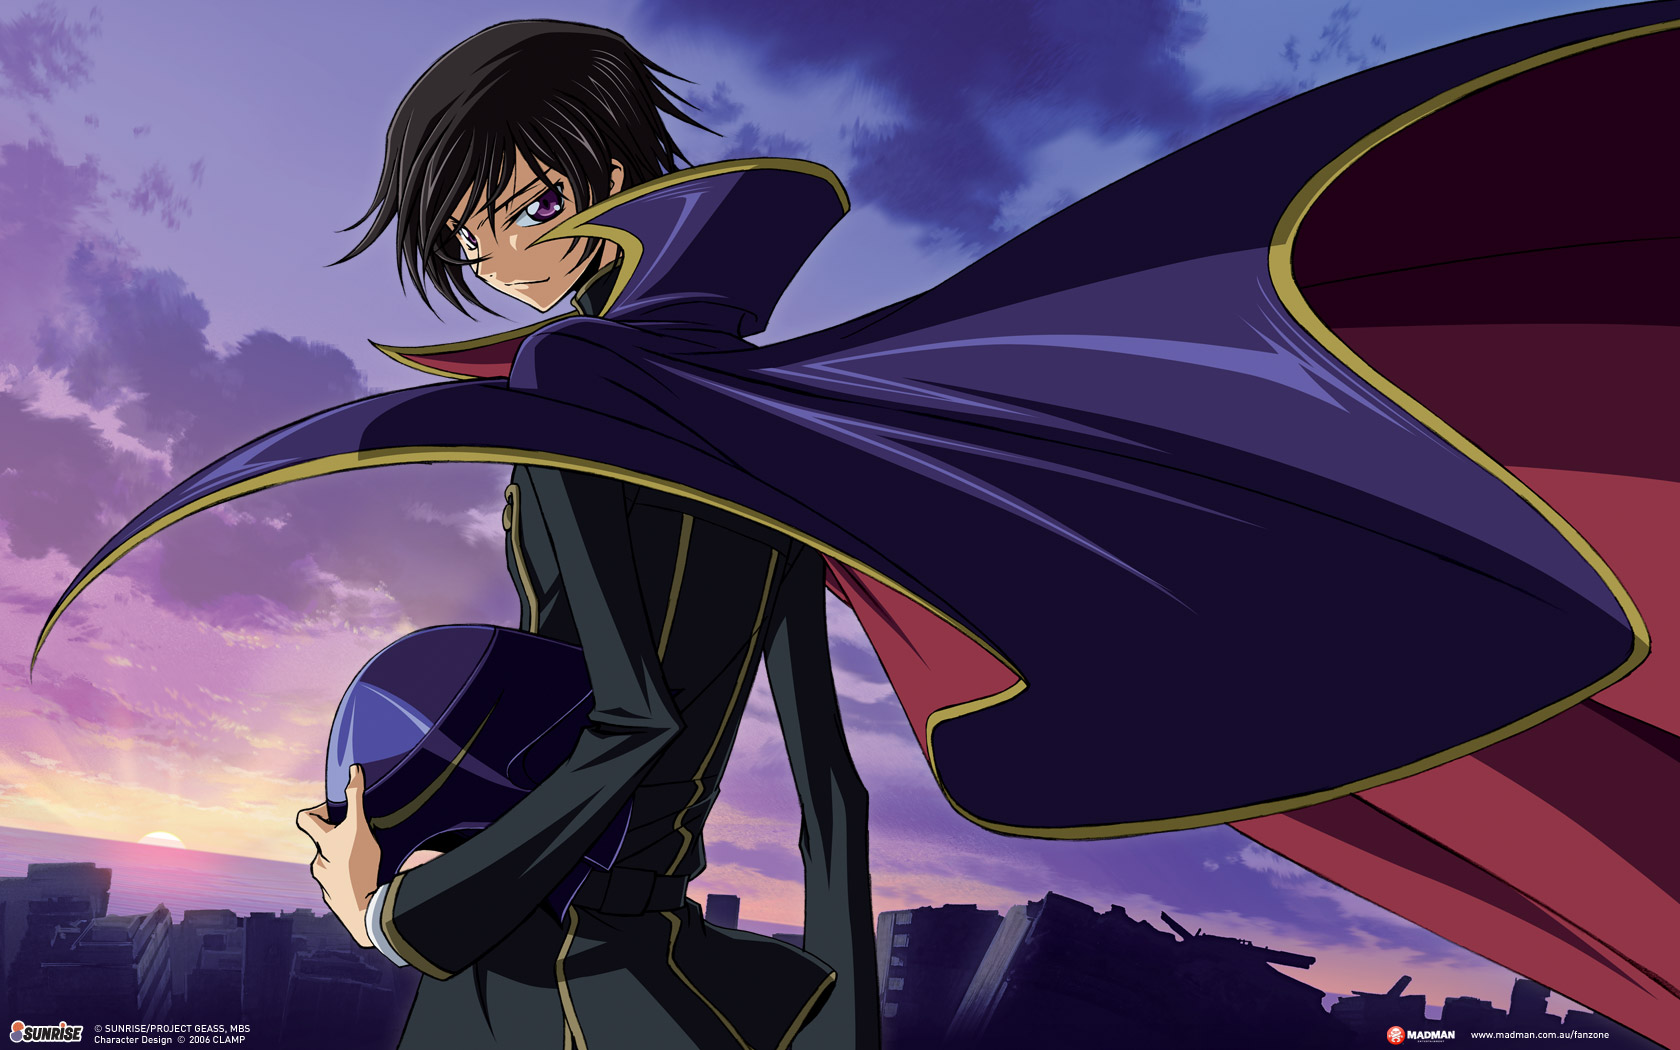 The Main Character and Villain, Lelouch Lamperouge